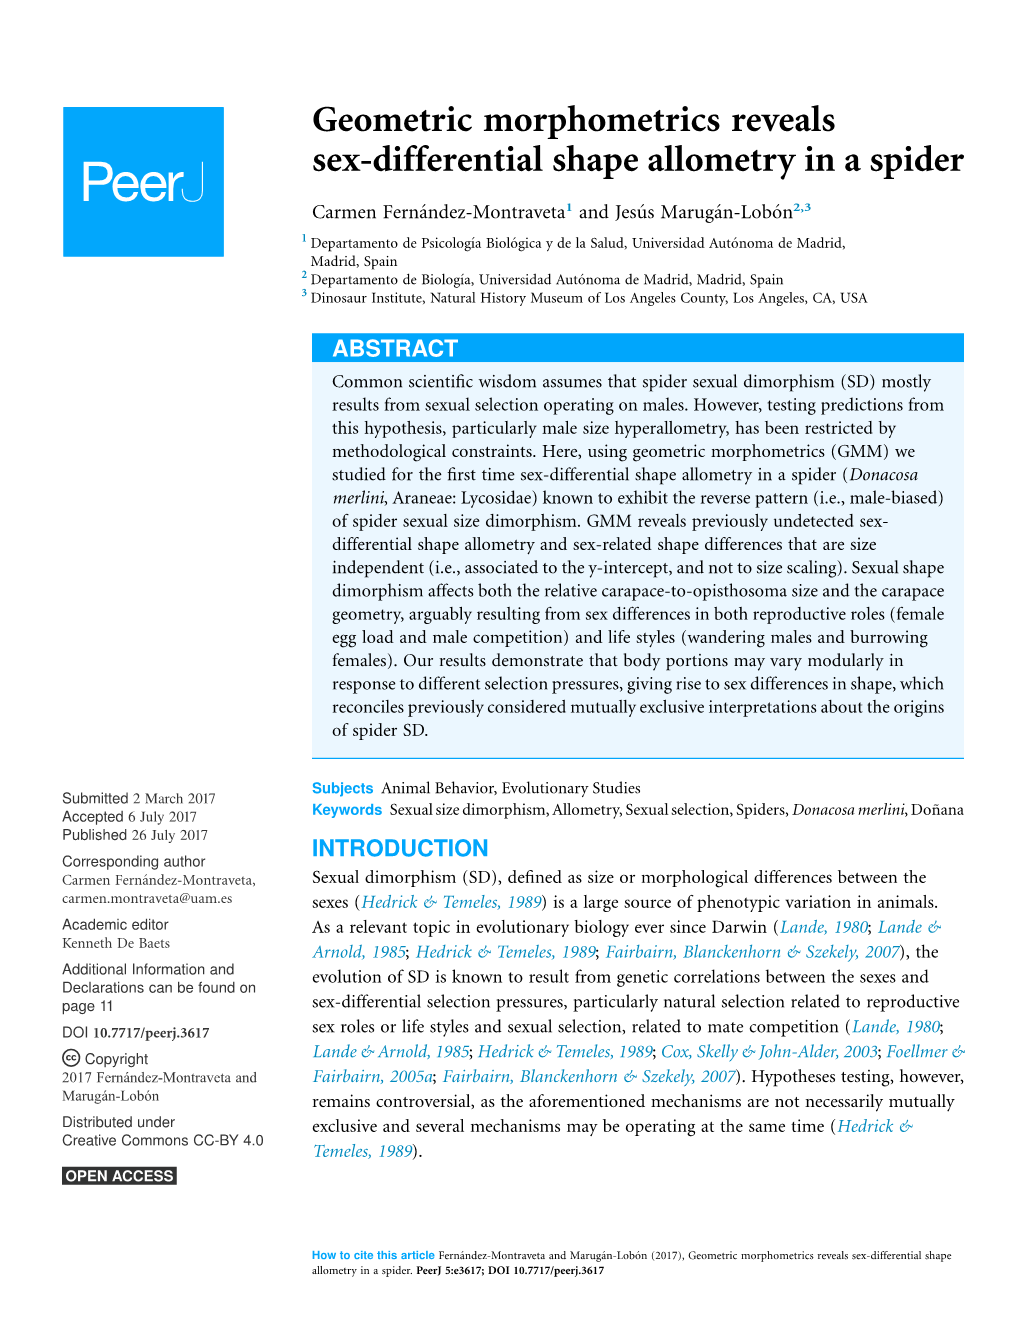 Geometric Morphometrics Reveals Sex-Differential Shape Allometry in a Spider